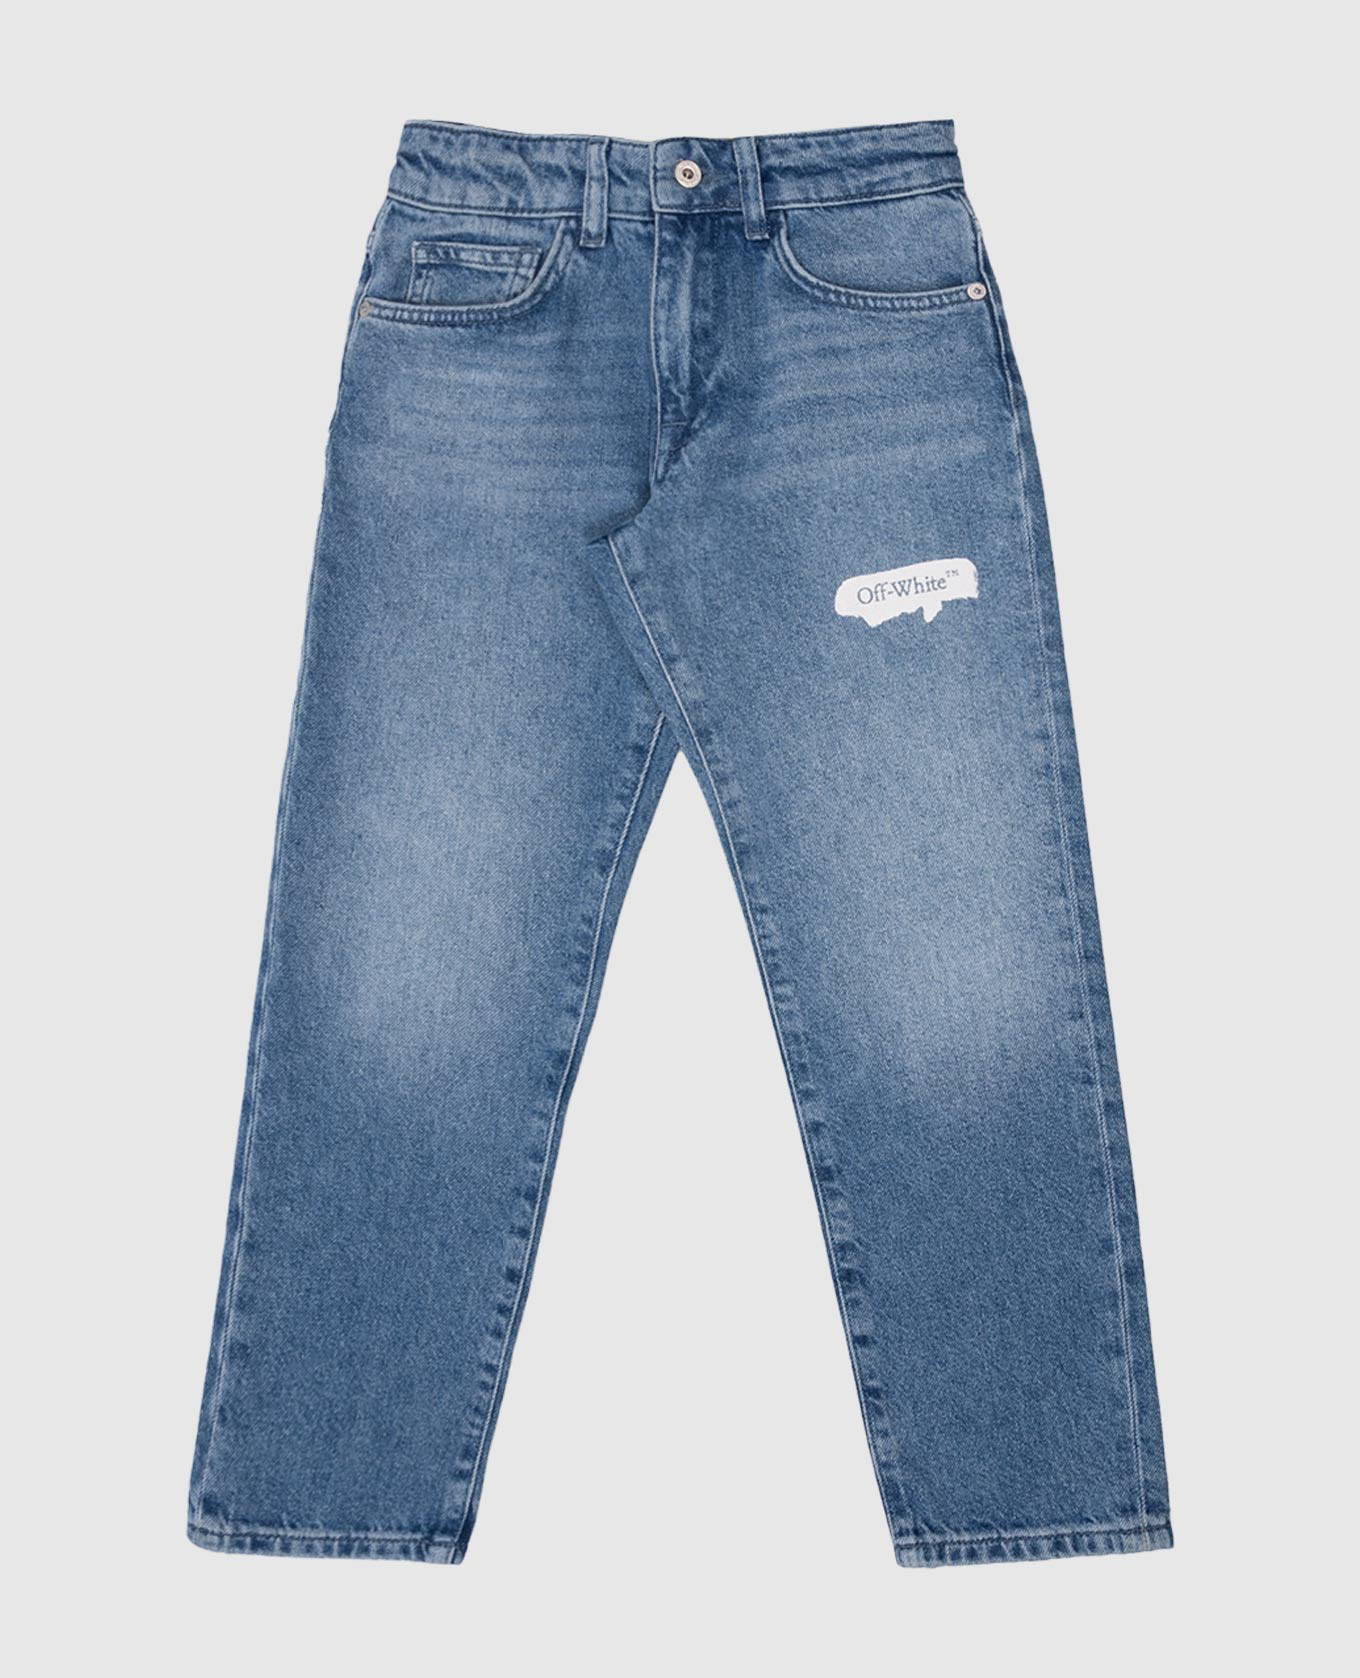 Children's blue jeans with Graphic logo print